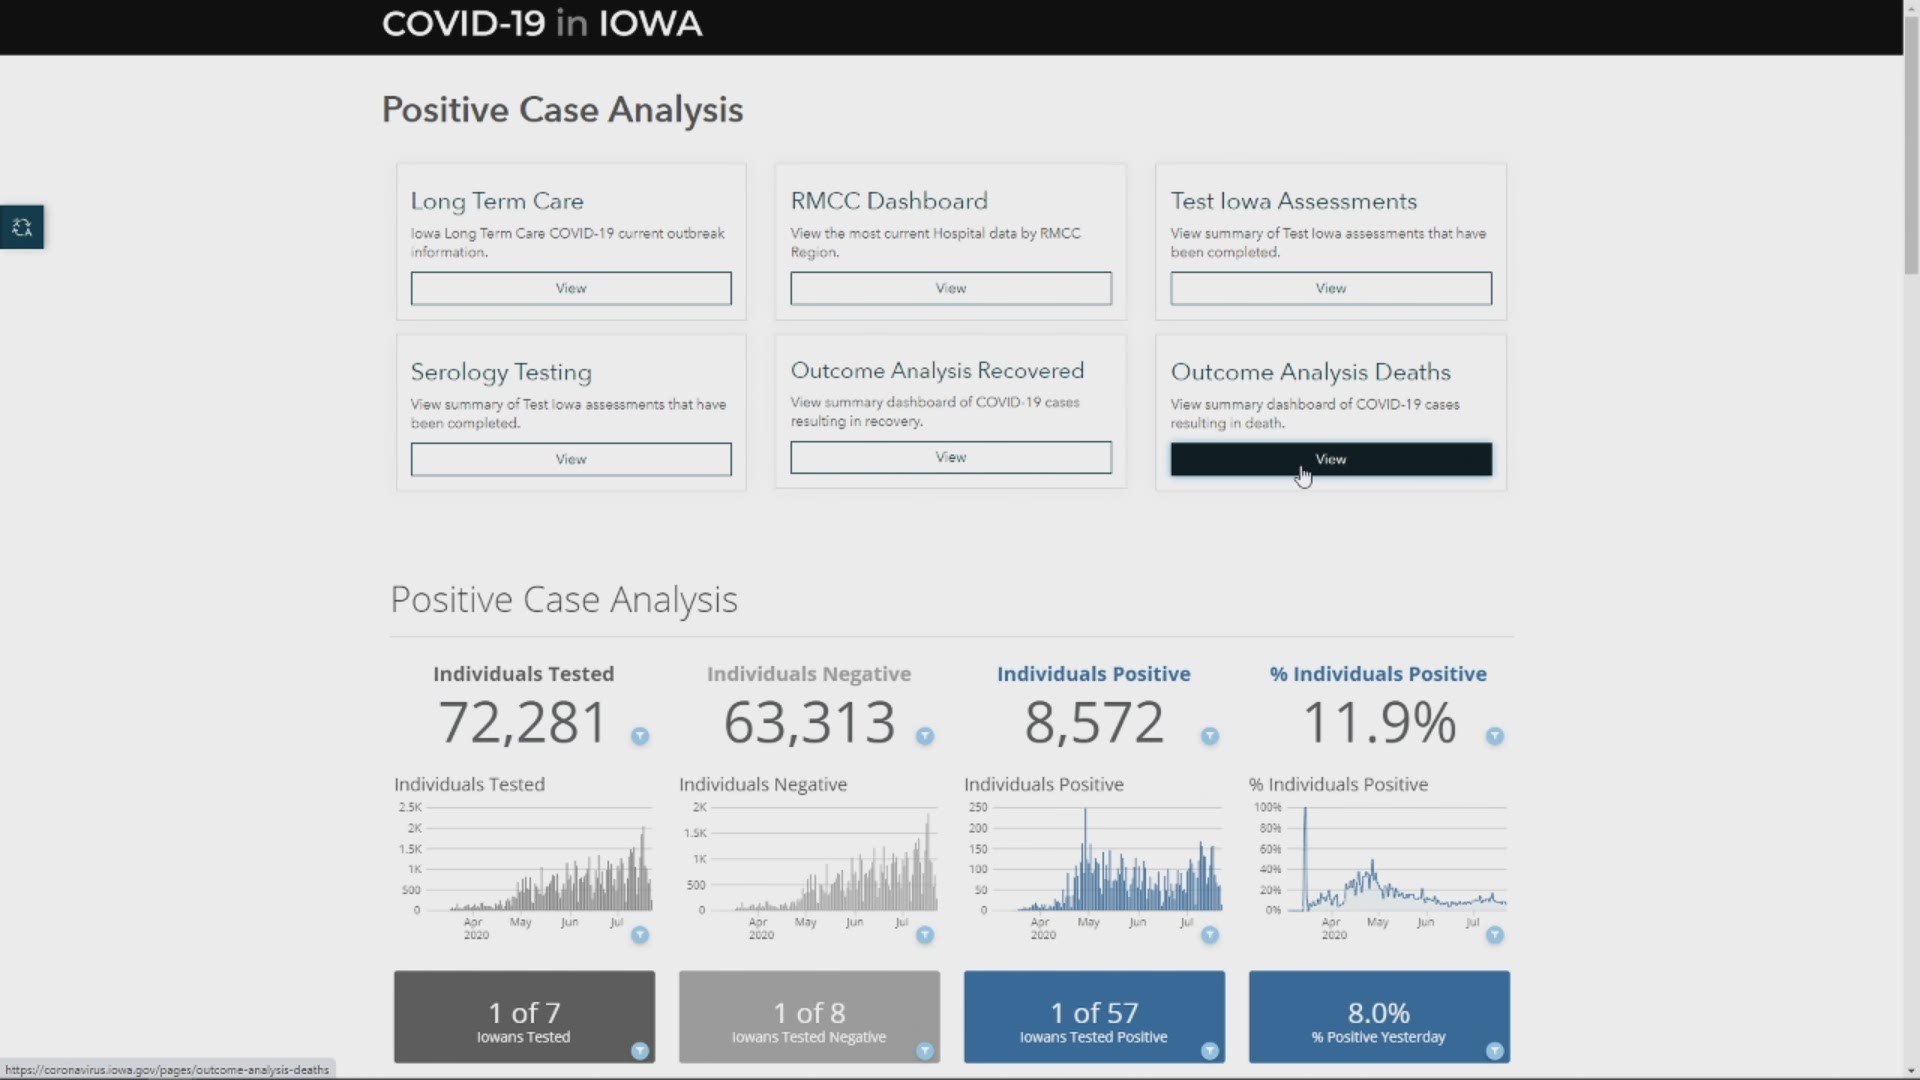 This screen recording shows the data presented from the Iowa Dept. of Public Health's coronavirus website, specifically on the death and recovery dashboards.